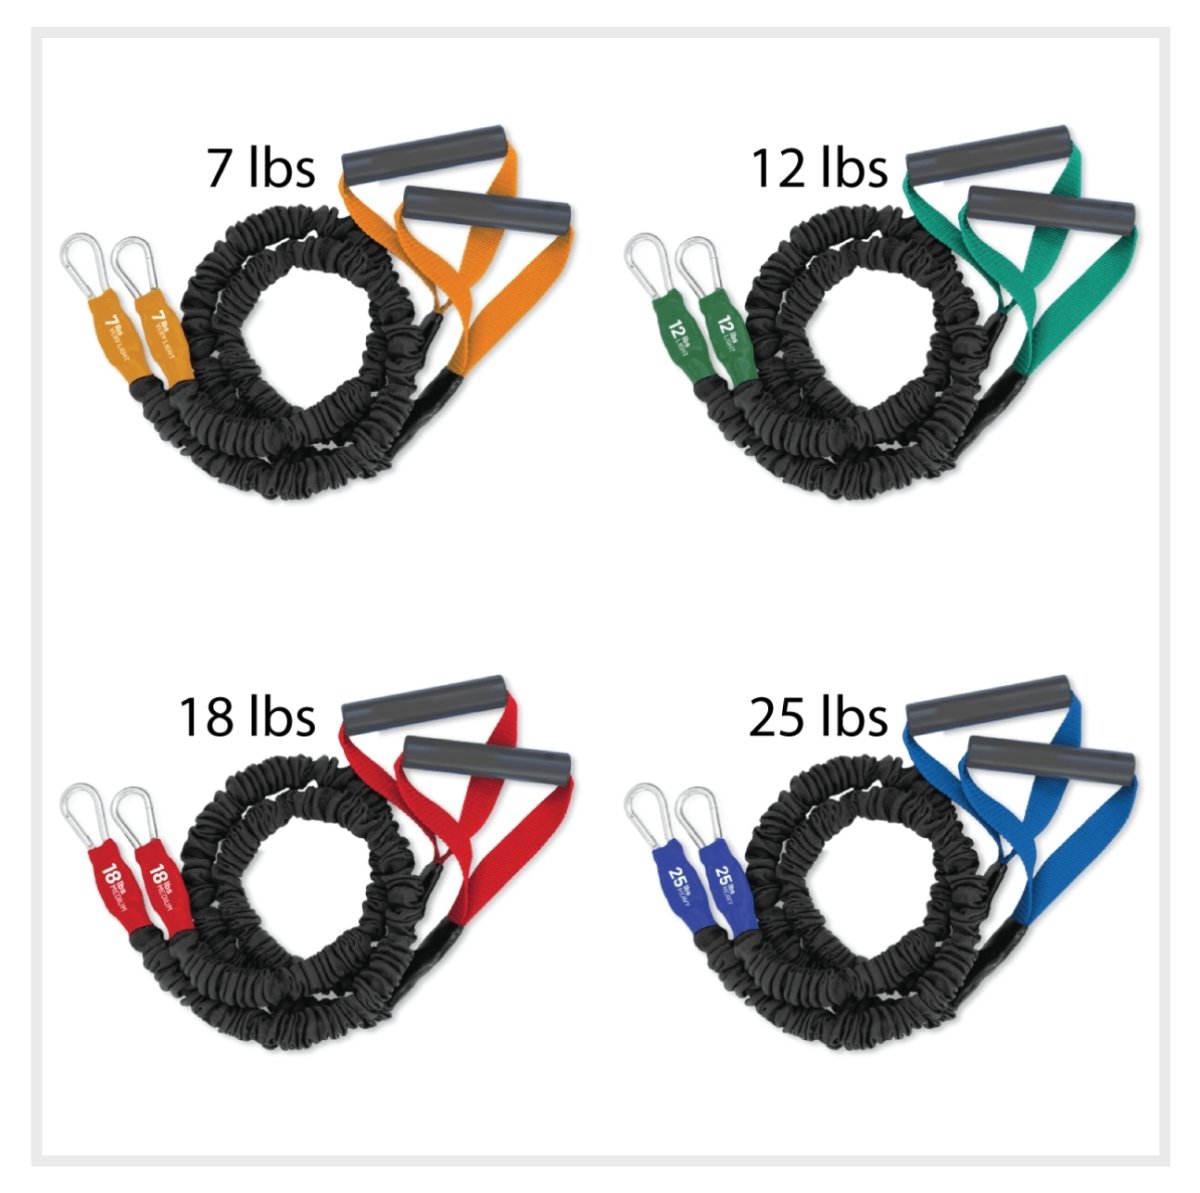 X-Over Shoulder and Arm Resistance Bands- 4 Pack (7lb/12lb/18lb/25lb) - FitCord Resistance Bands american made covered resistance tubes for shoulder and upper body workouts. Compare to Crossoverover Symmetry for home gym workouts and crossfit